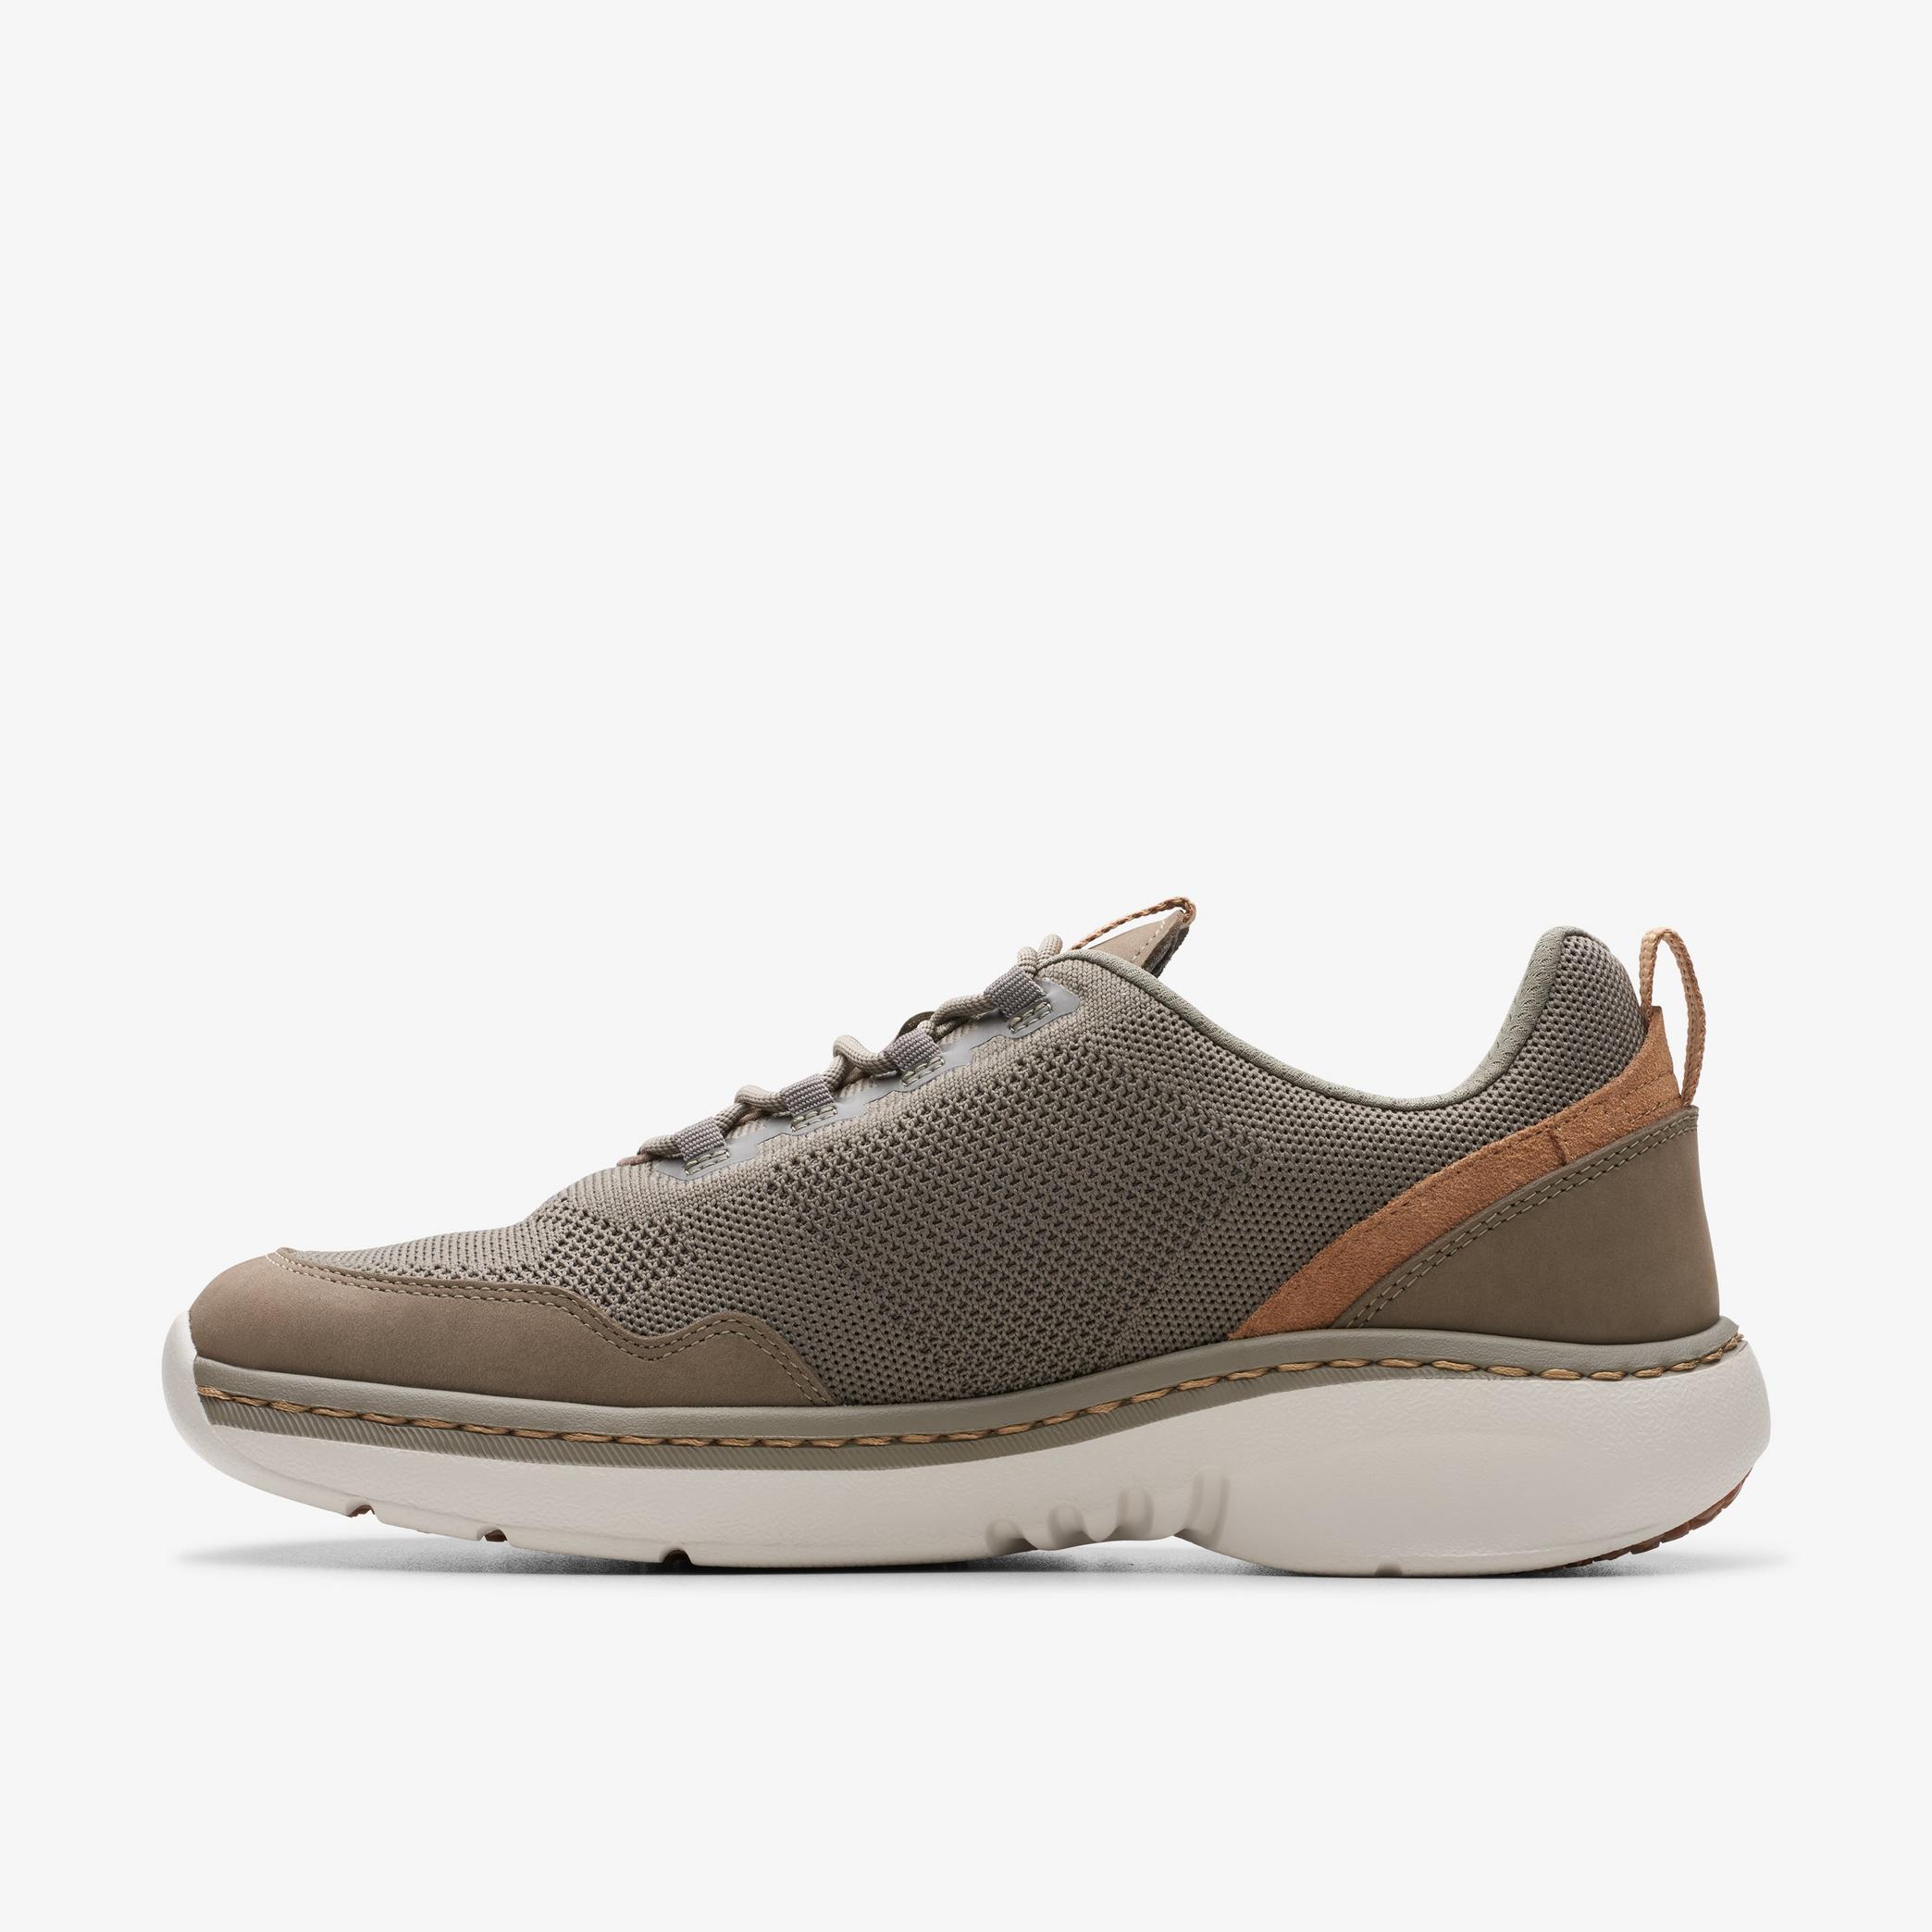 Clarks Pro Knit Stone Combination Sneakers, view 2 of 6